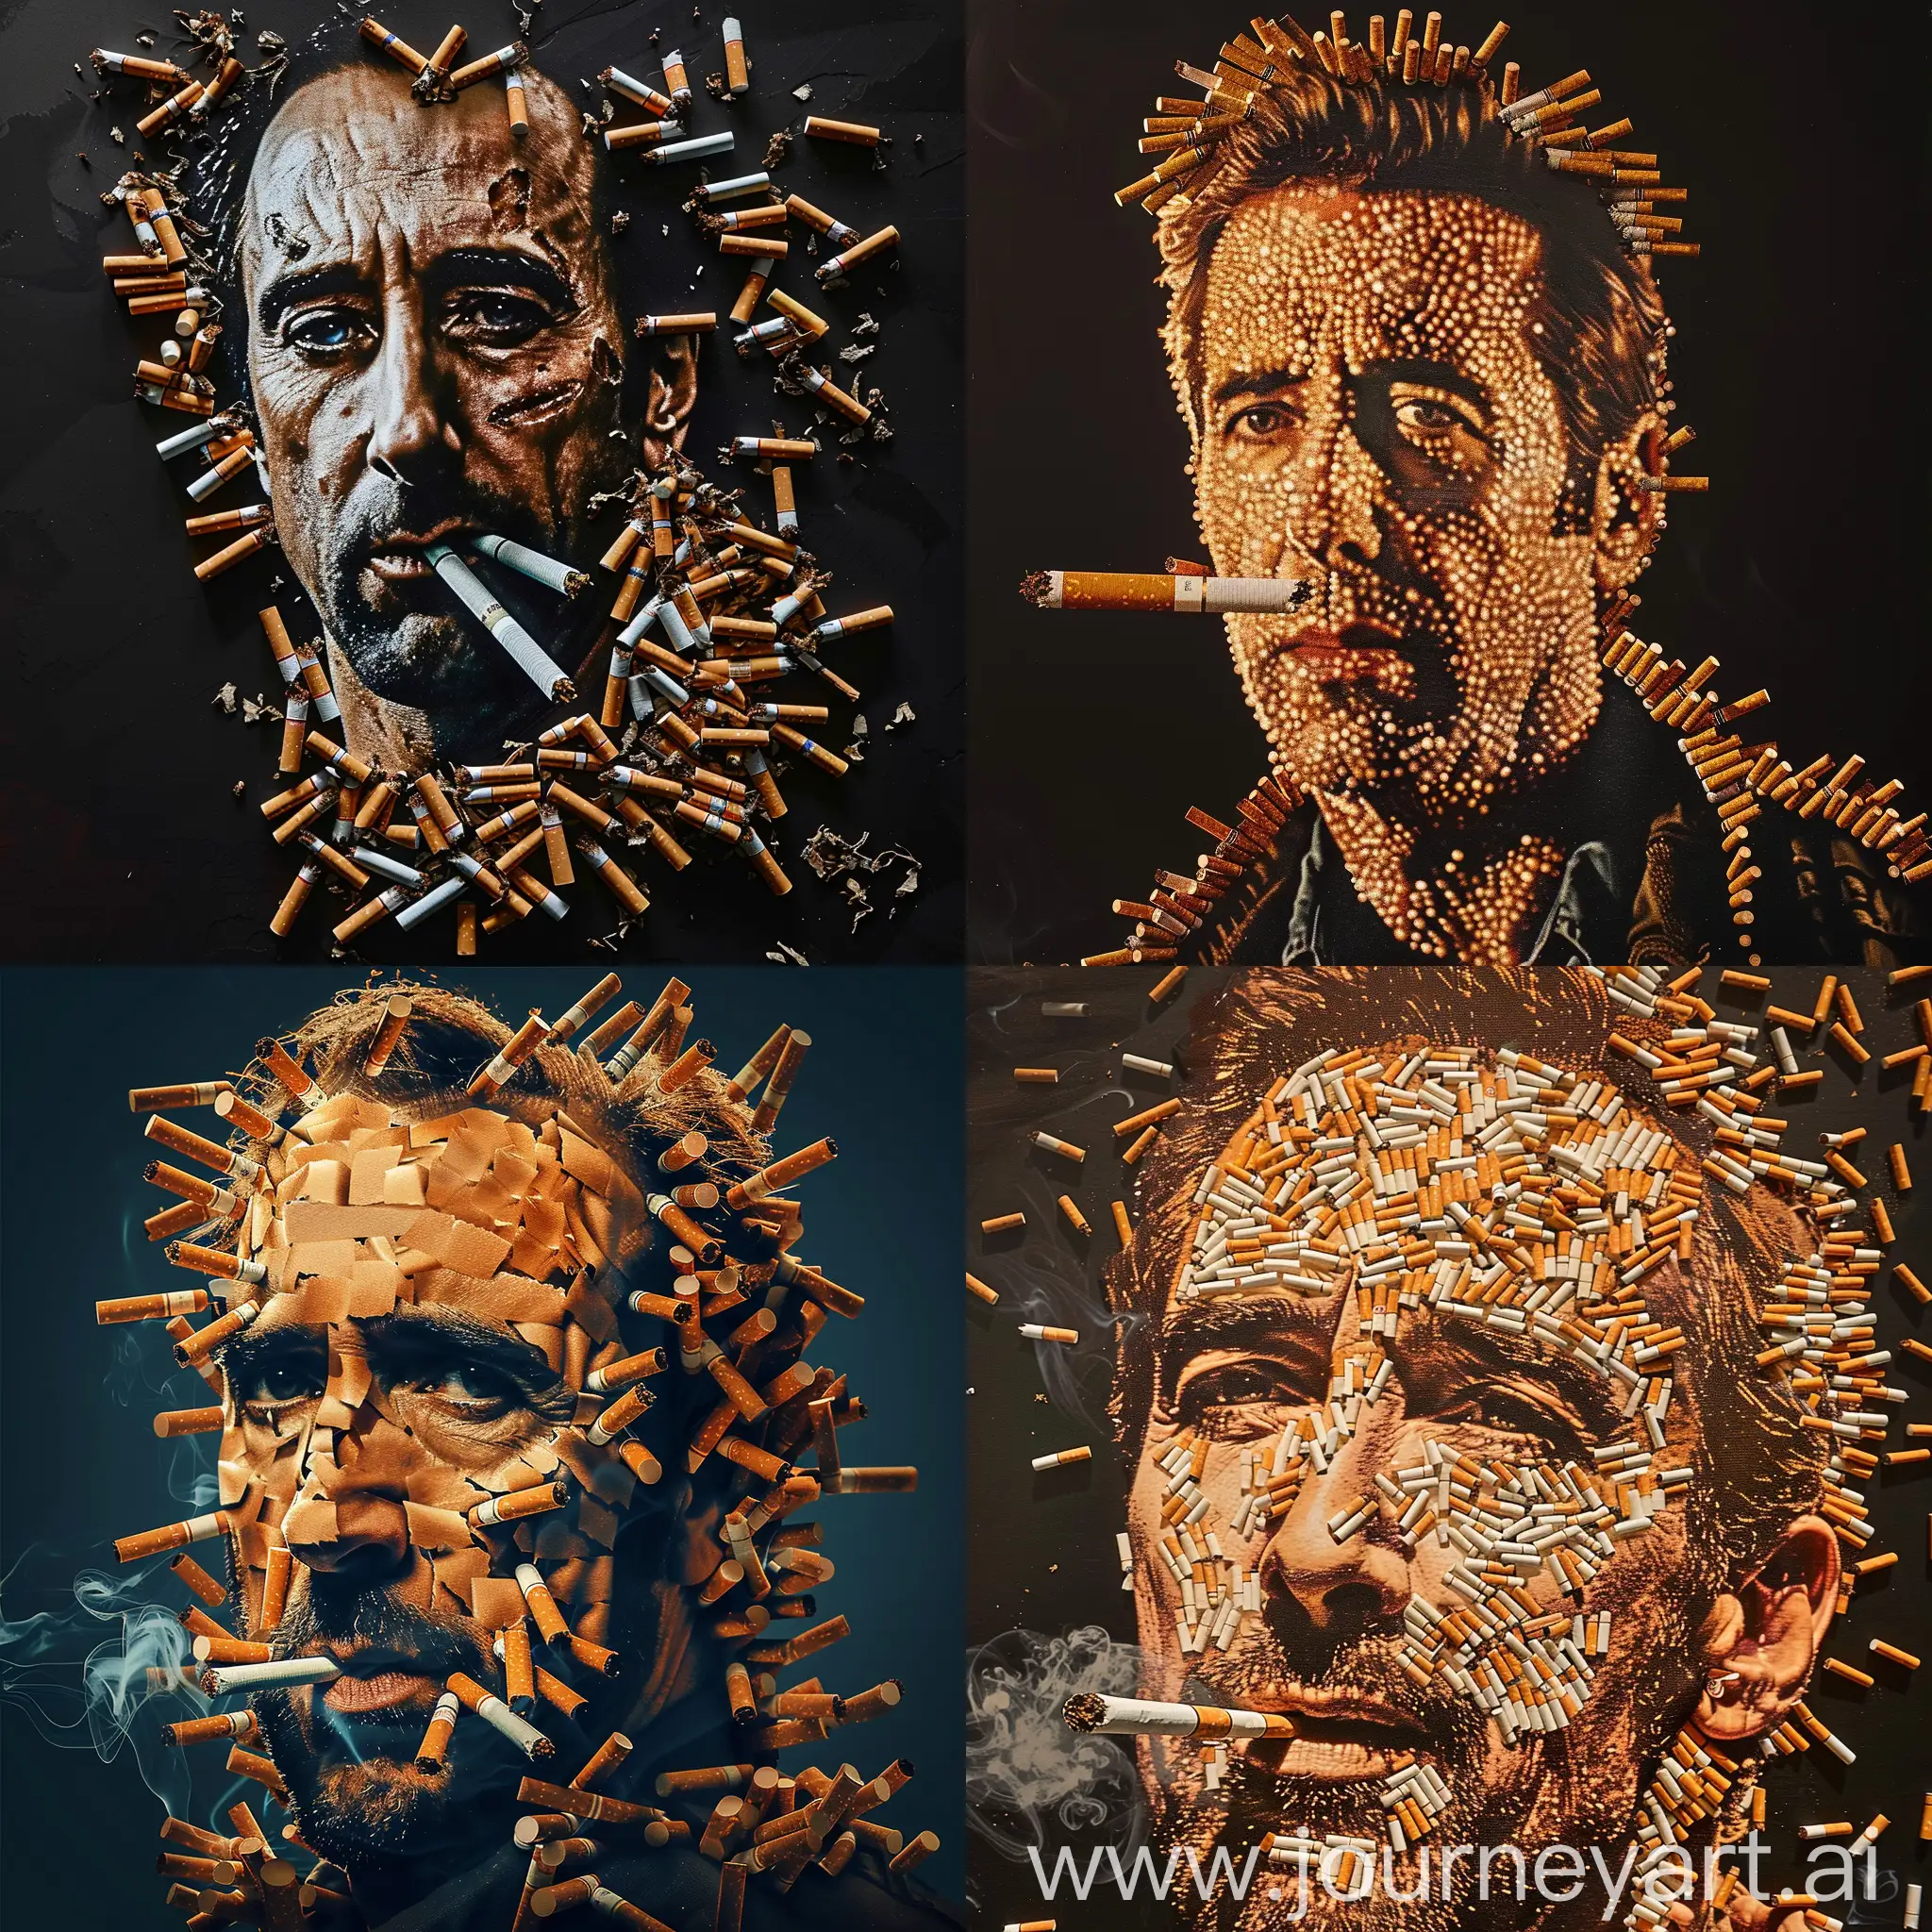 Nicholas-Cage-Portrait-Realistic-Cigarette-Art-Inspired-by-Lord-of-War-Movie-Poster